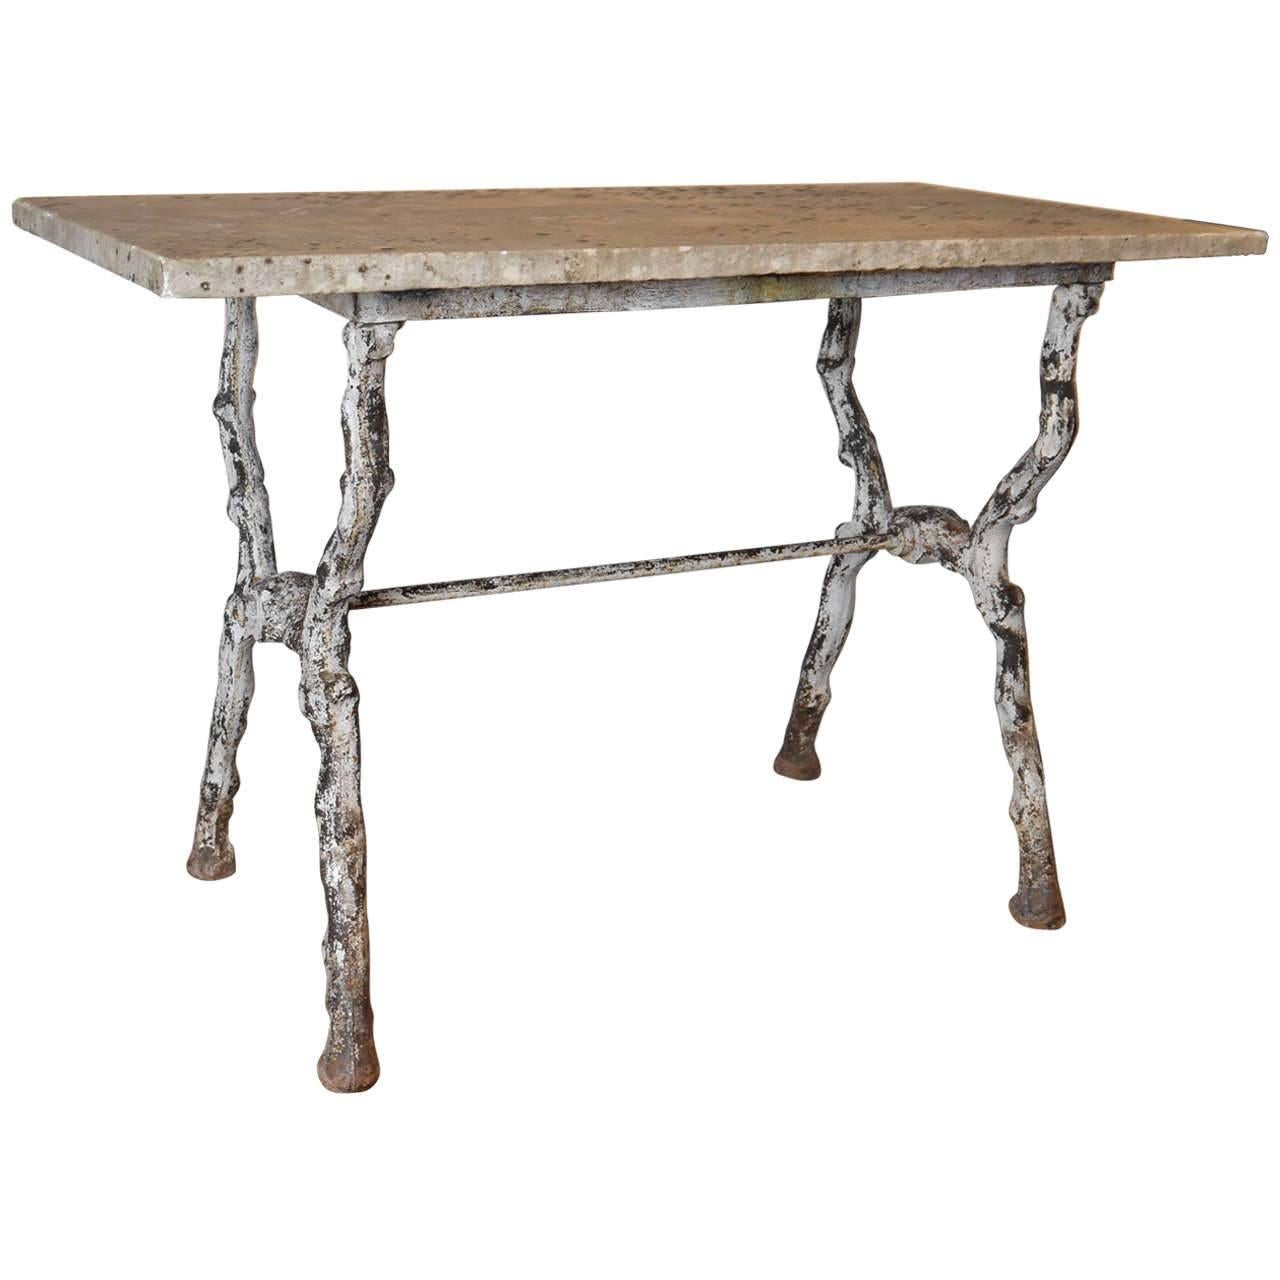 French 19th Century Faux-Bois Garden Table with Marble Top